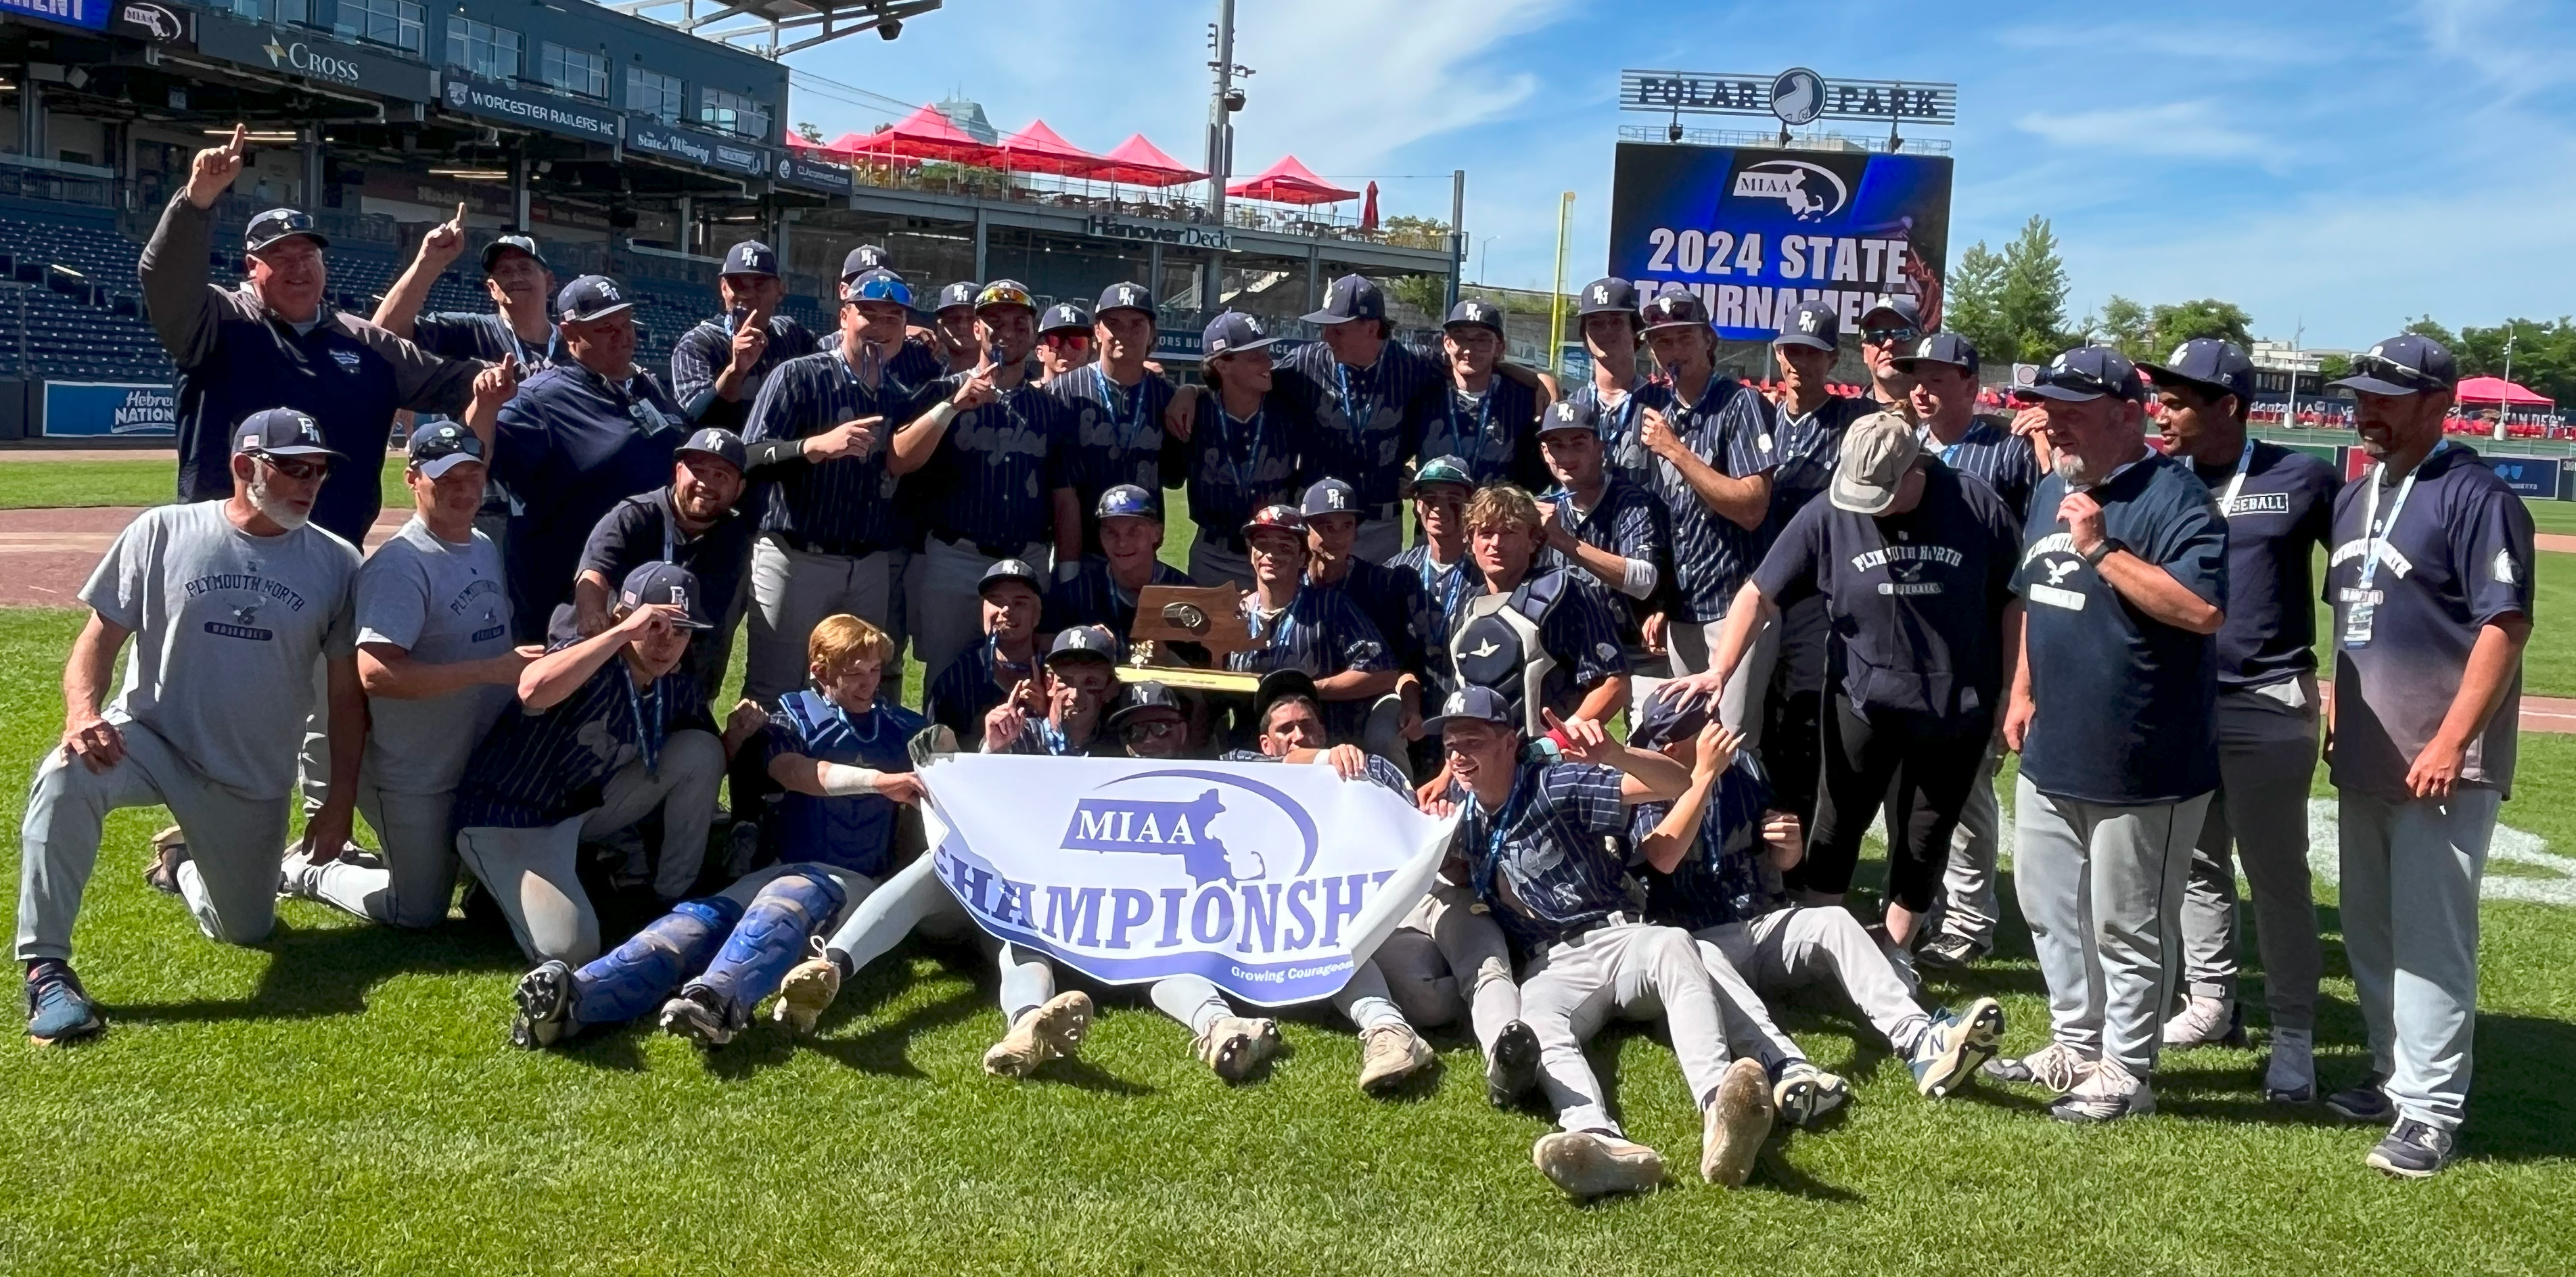 Plymouth North added a 2024 state championship to the school's previous baseball titles in 2008 and 2011.